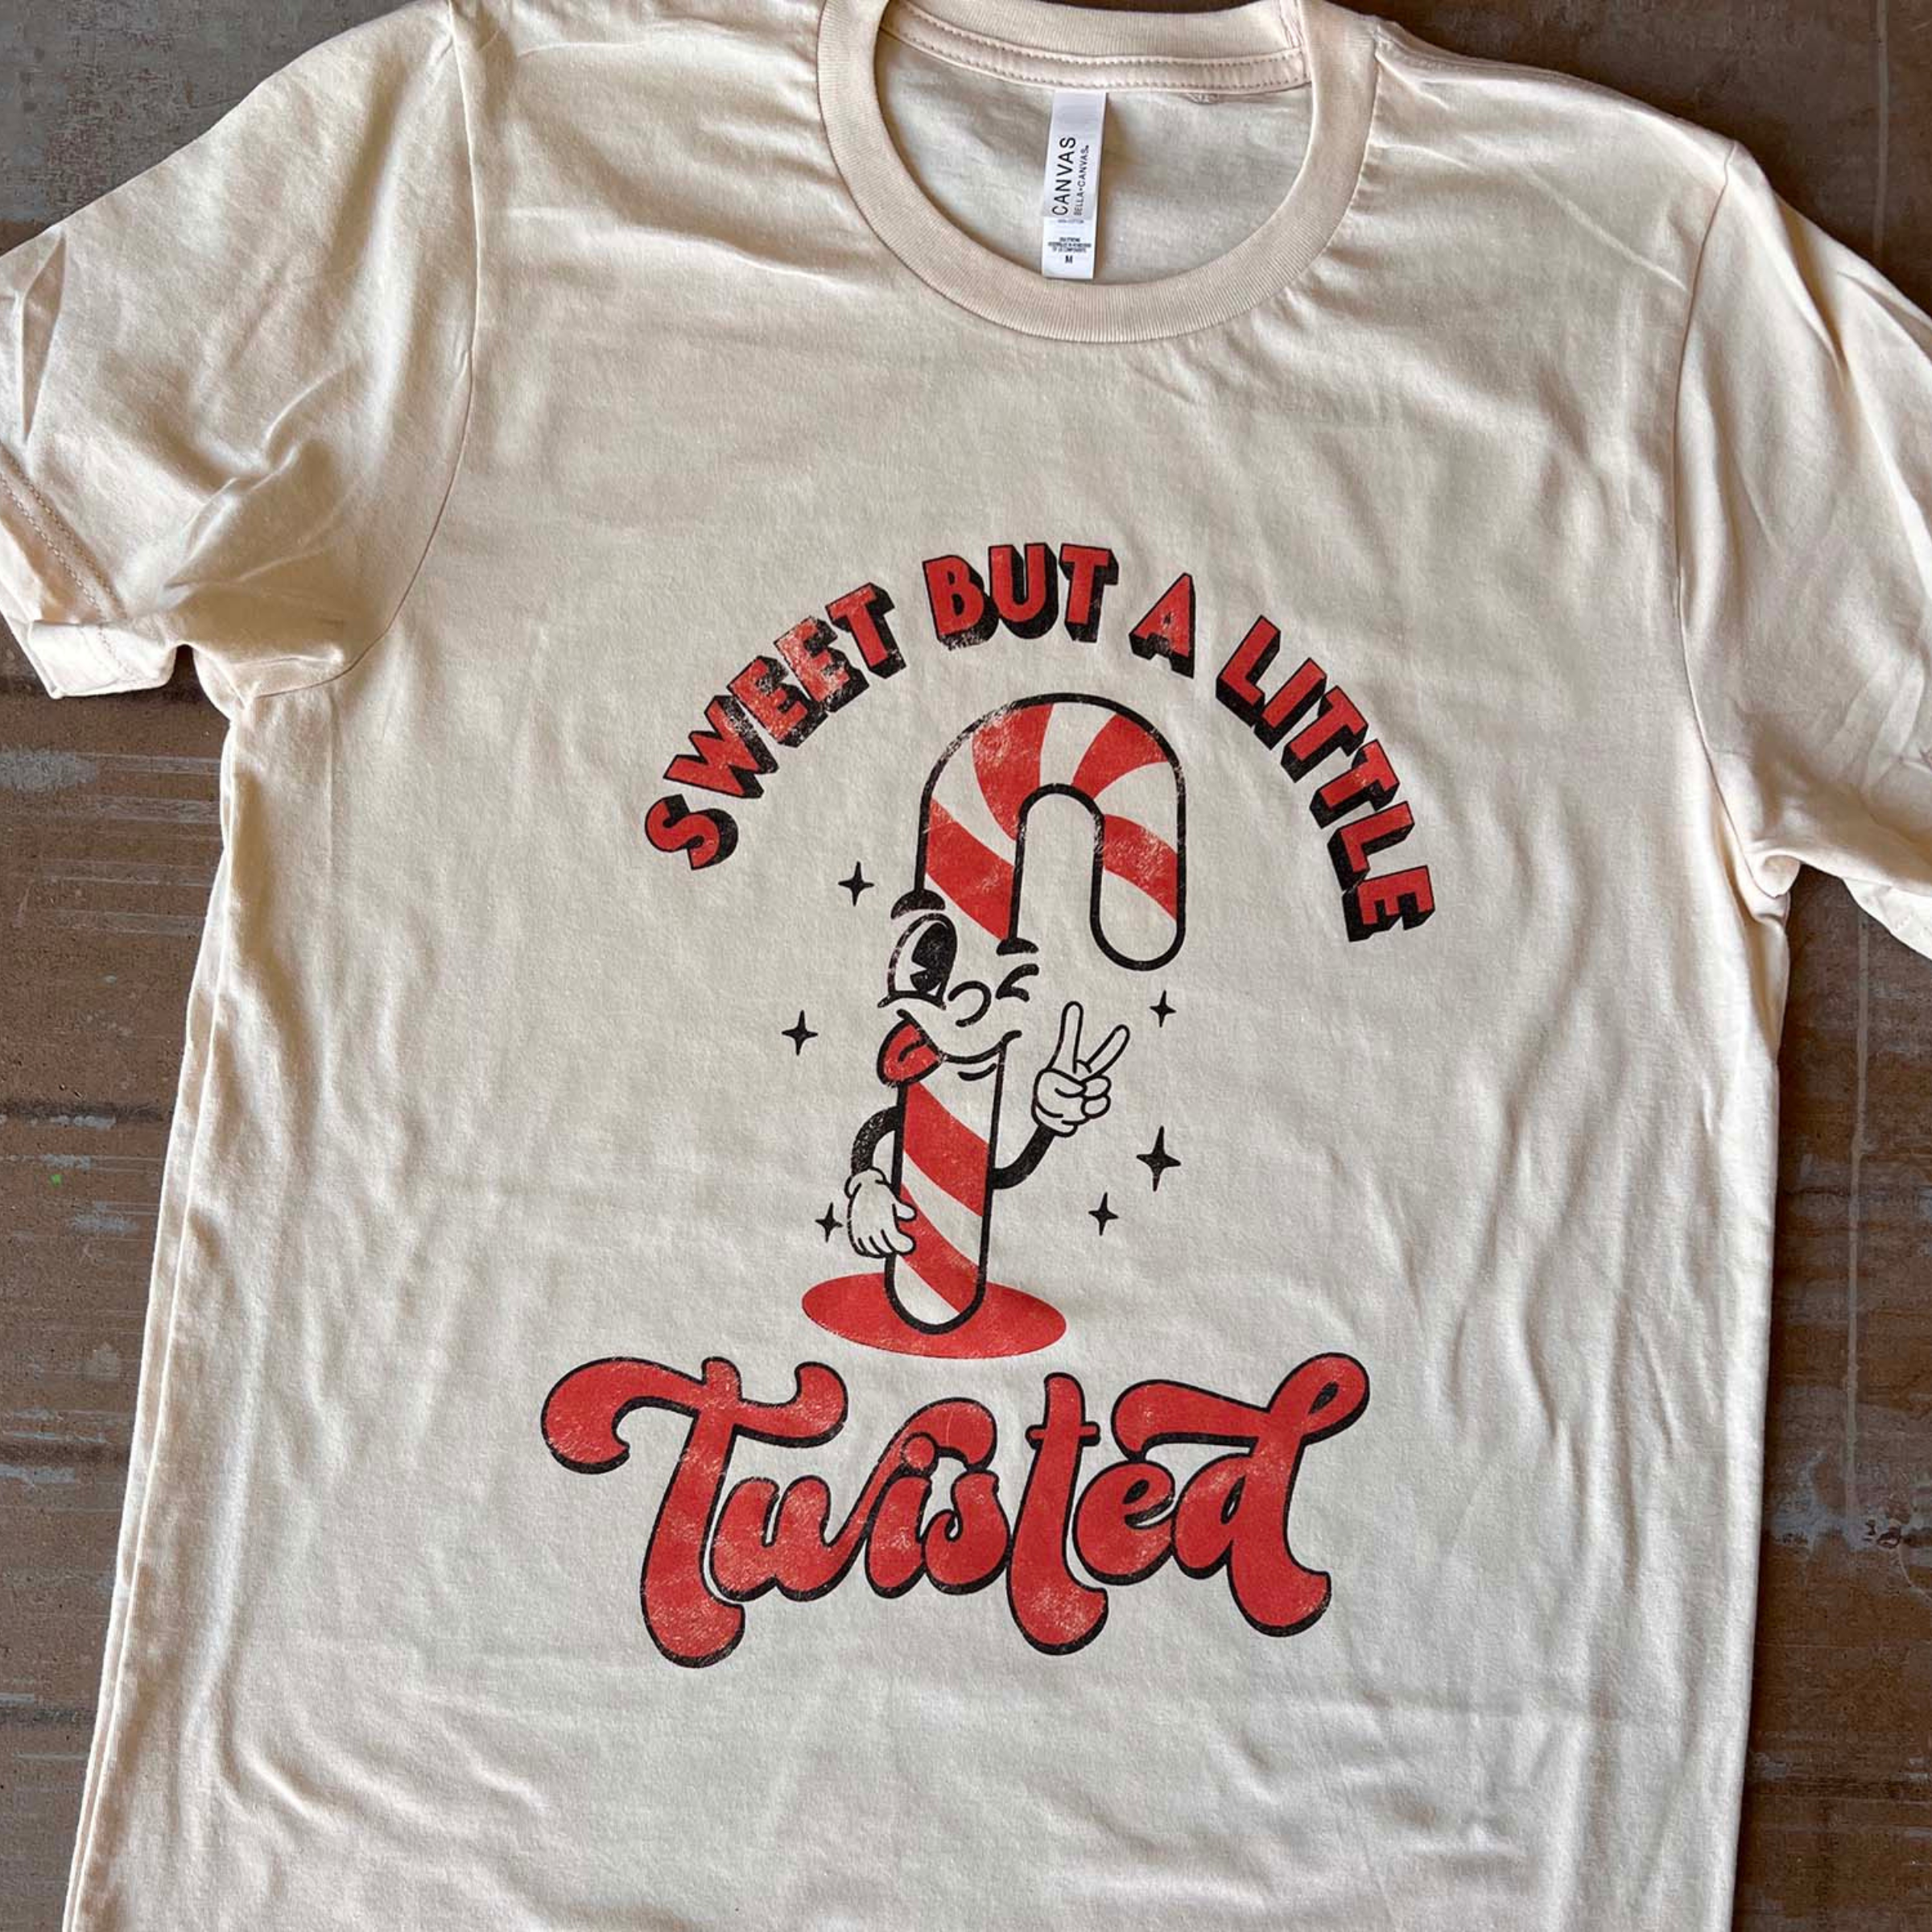 This cream Bella + Canvas tee includes a crew neckline, short sleeves, and a graphic that says "Sweet But A Little Twisted" in a mix of cute, red fonts with a candy cane throwing up the peace sign. It is pictured here as a flat lay. 